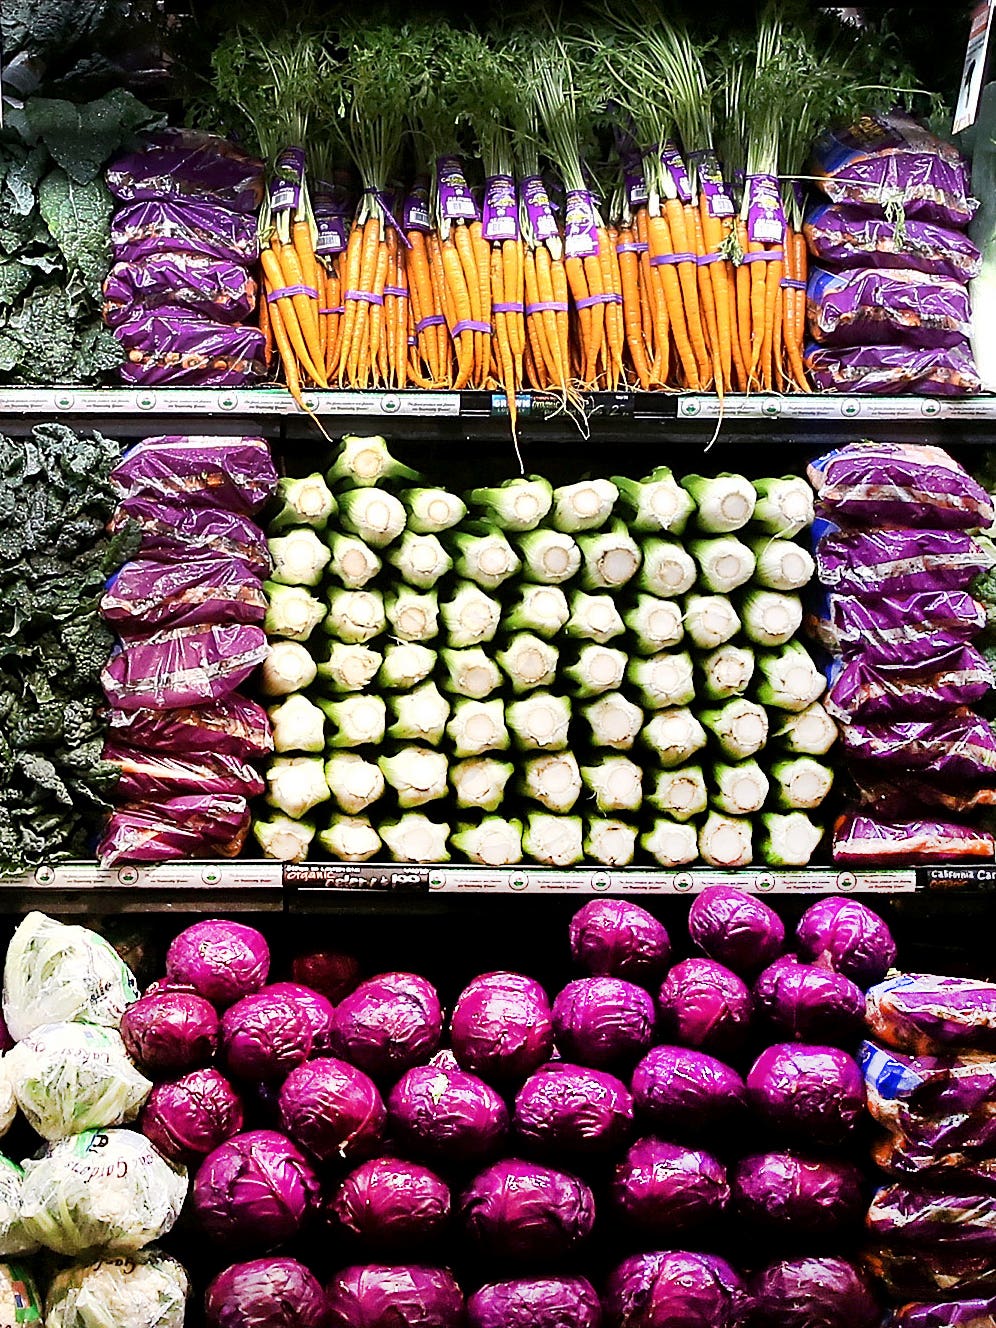 3 Seriously Genius Whole Foods Shopping Tips We Found on Reddit